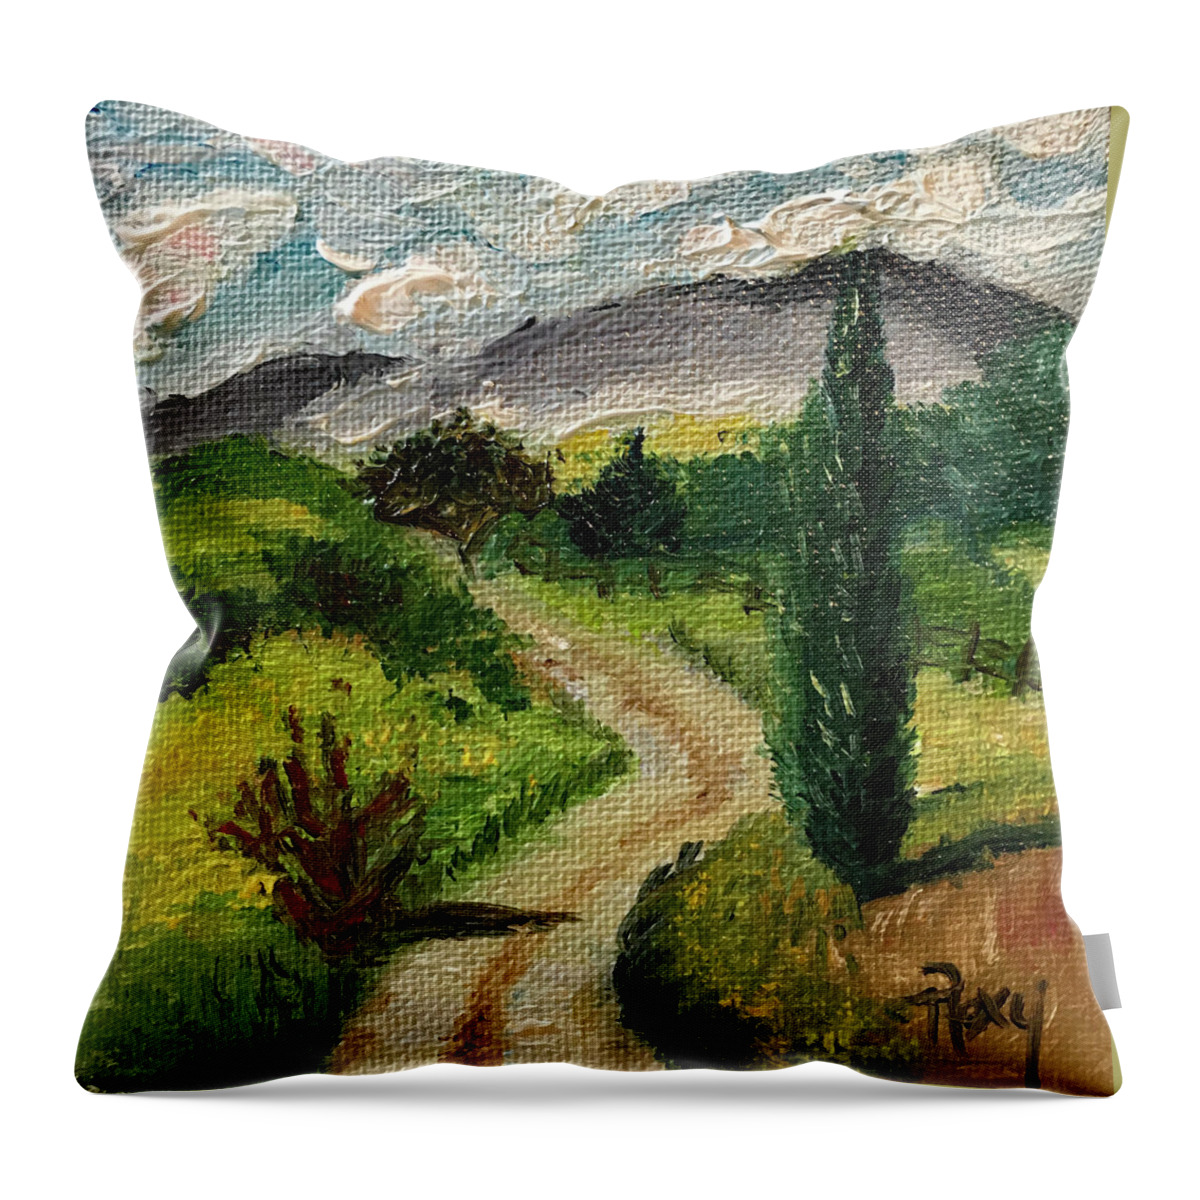 Tuscany Throw Pillow featuring the painting Tuscan Winding Road by Roxy Rich